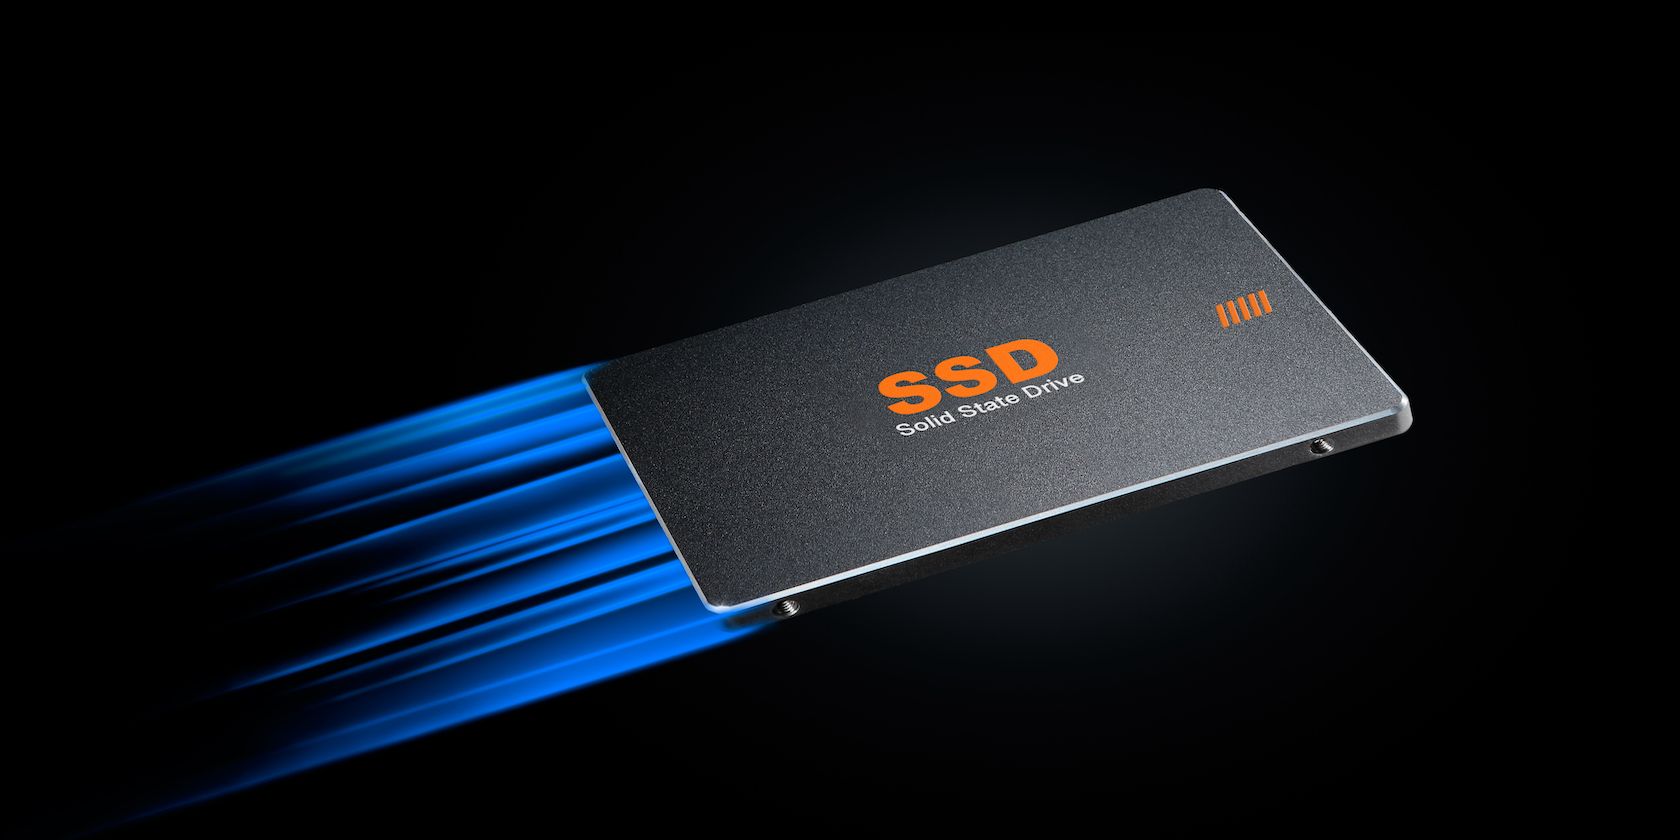 The 7 Fastest SSDs You Can Buy in 2021